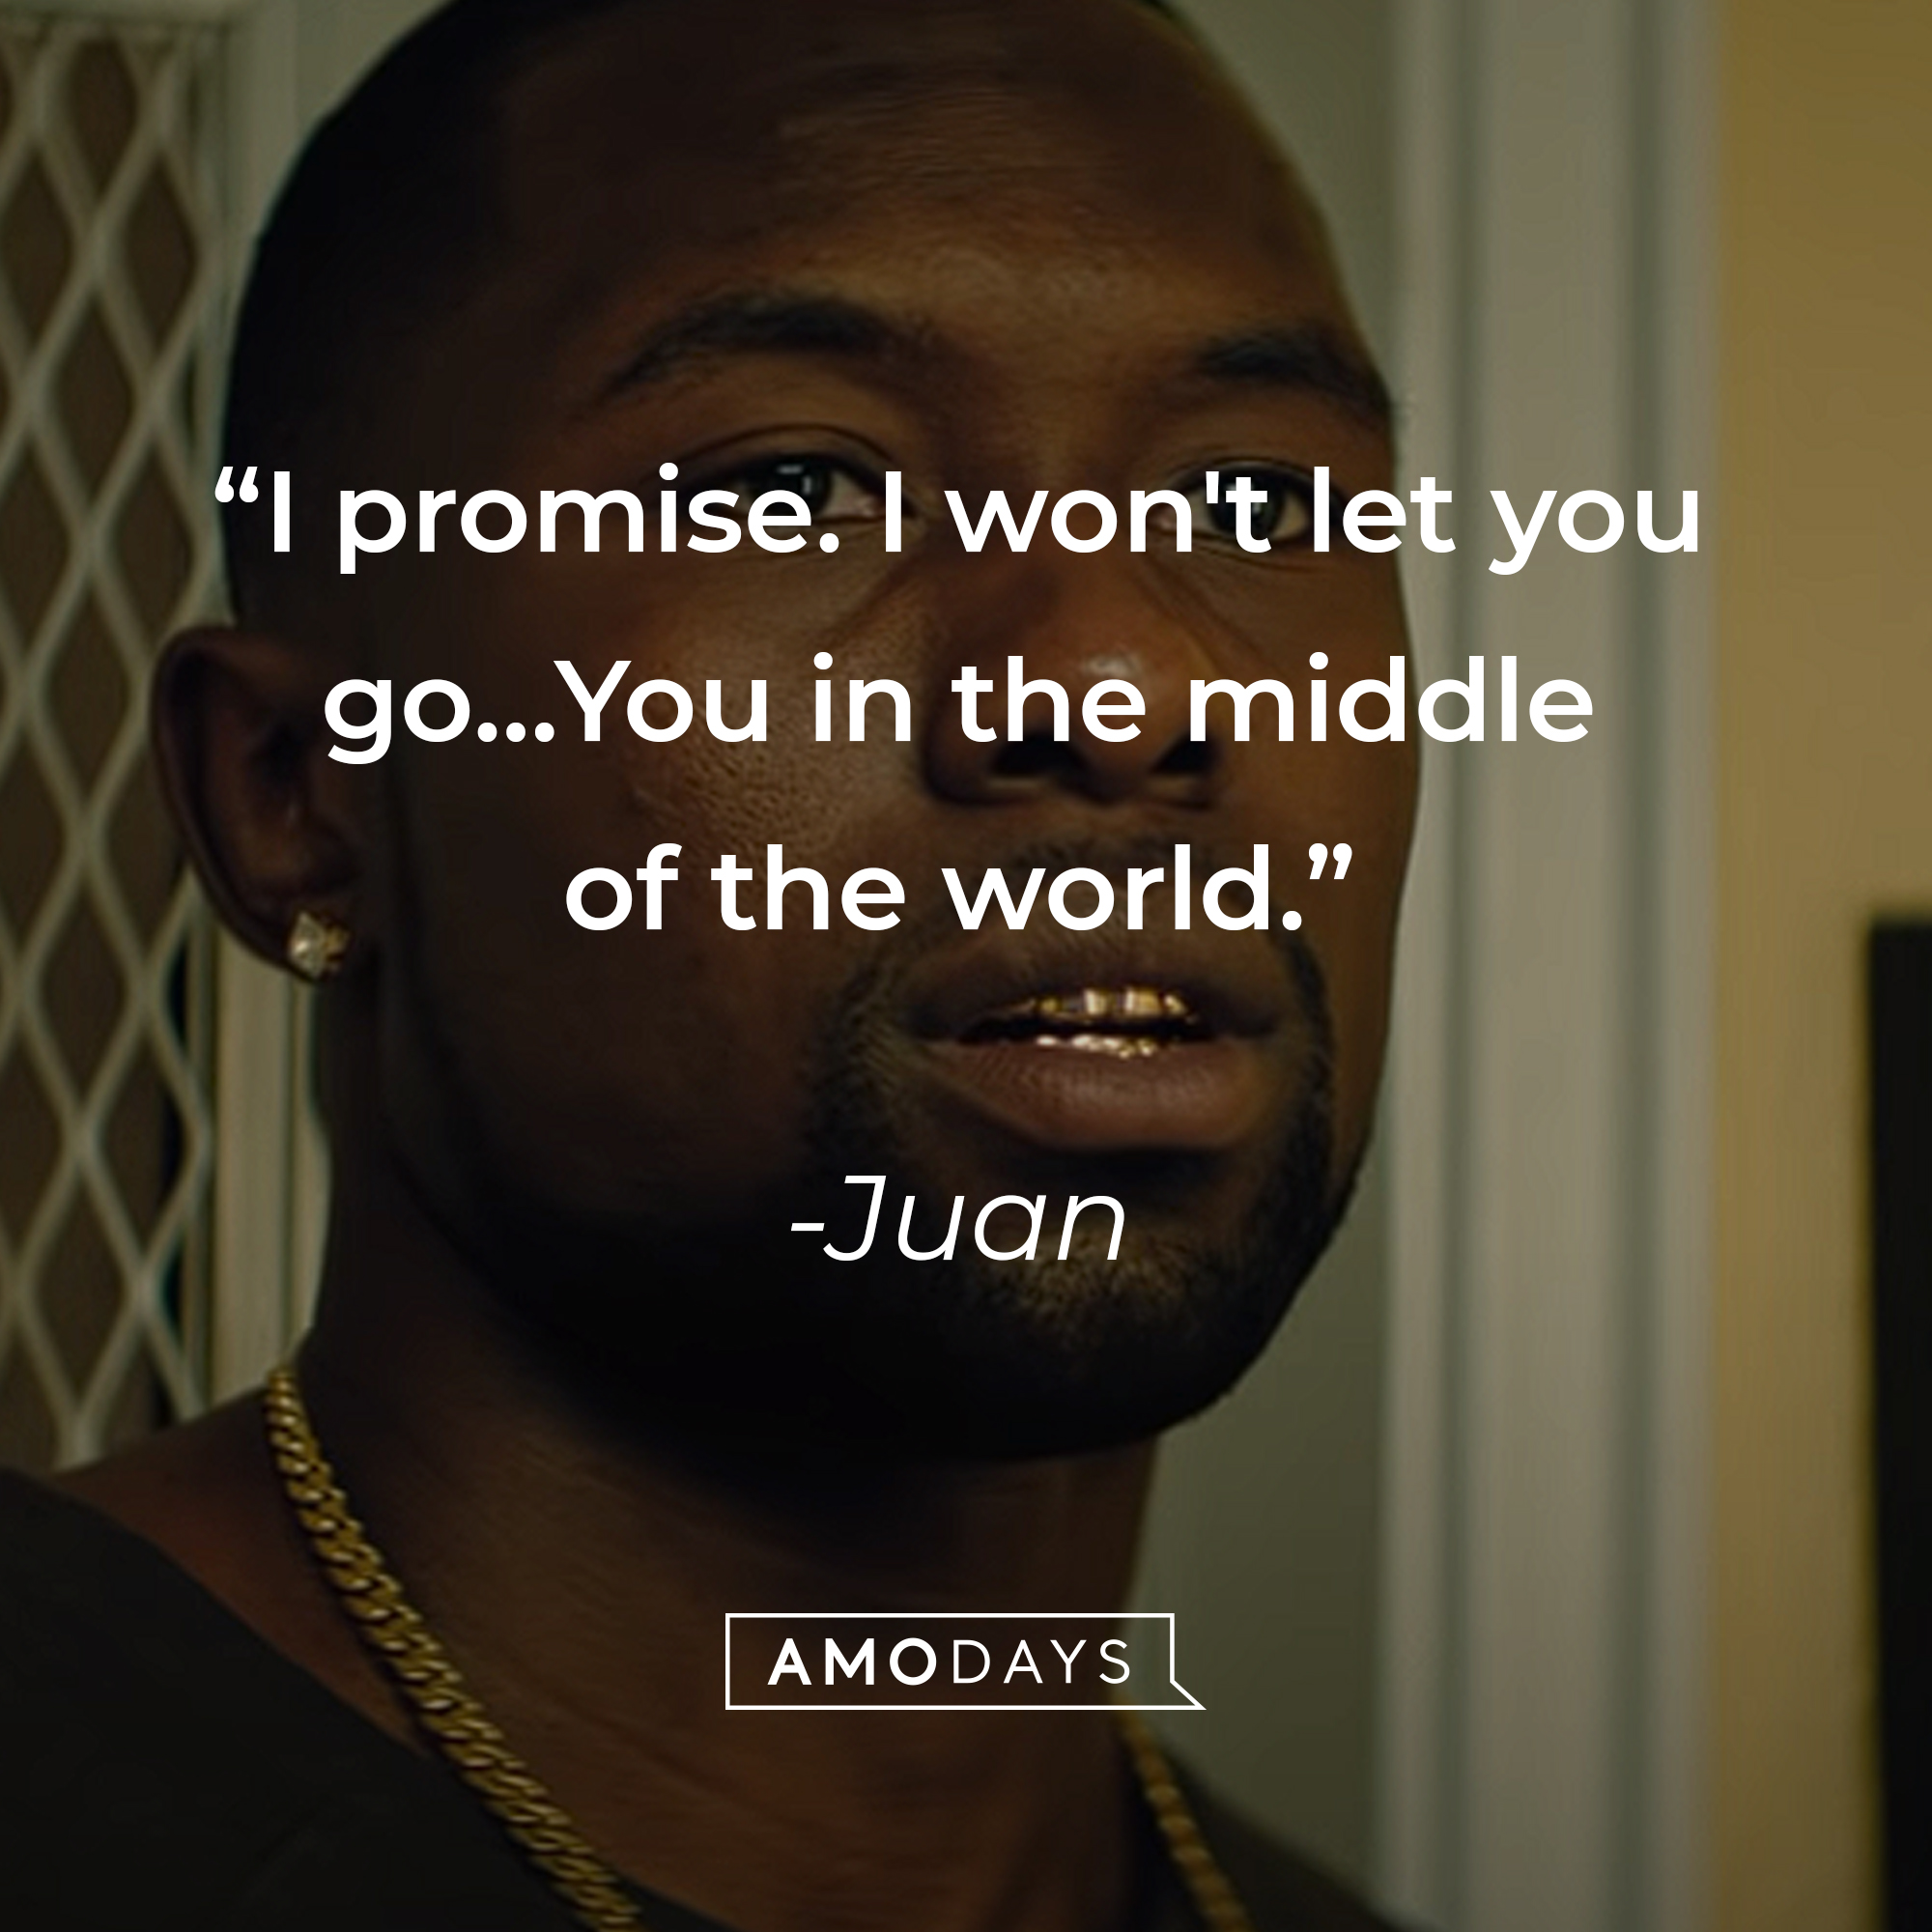 An image of Chiron with Juan’s quote: "I promise. I won't let you go. Hey man. I got you. …You in the middle of the world." | Source: youtube.com/A24